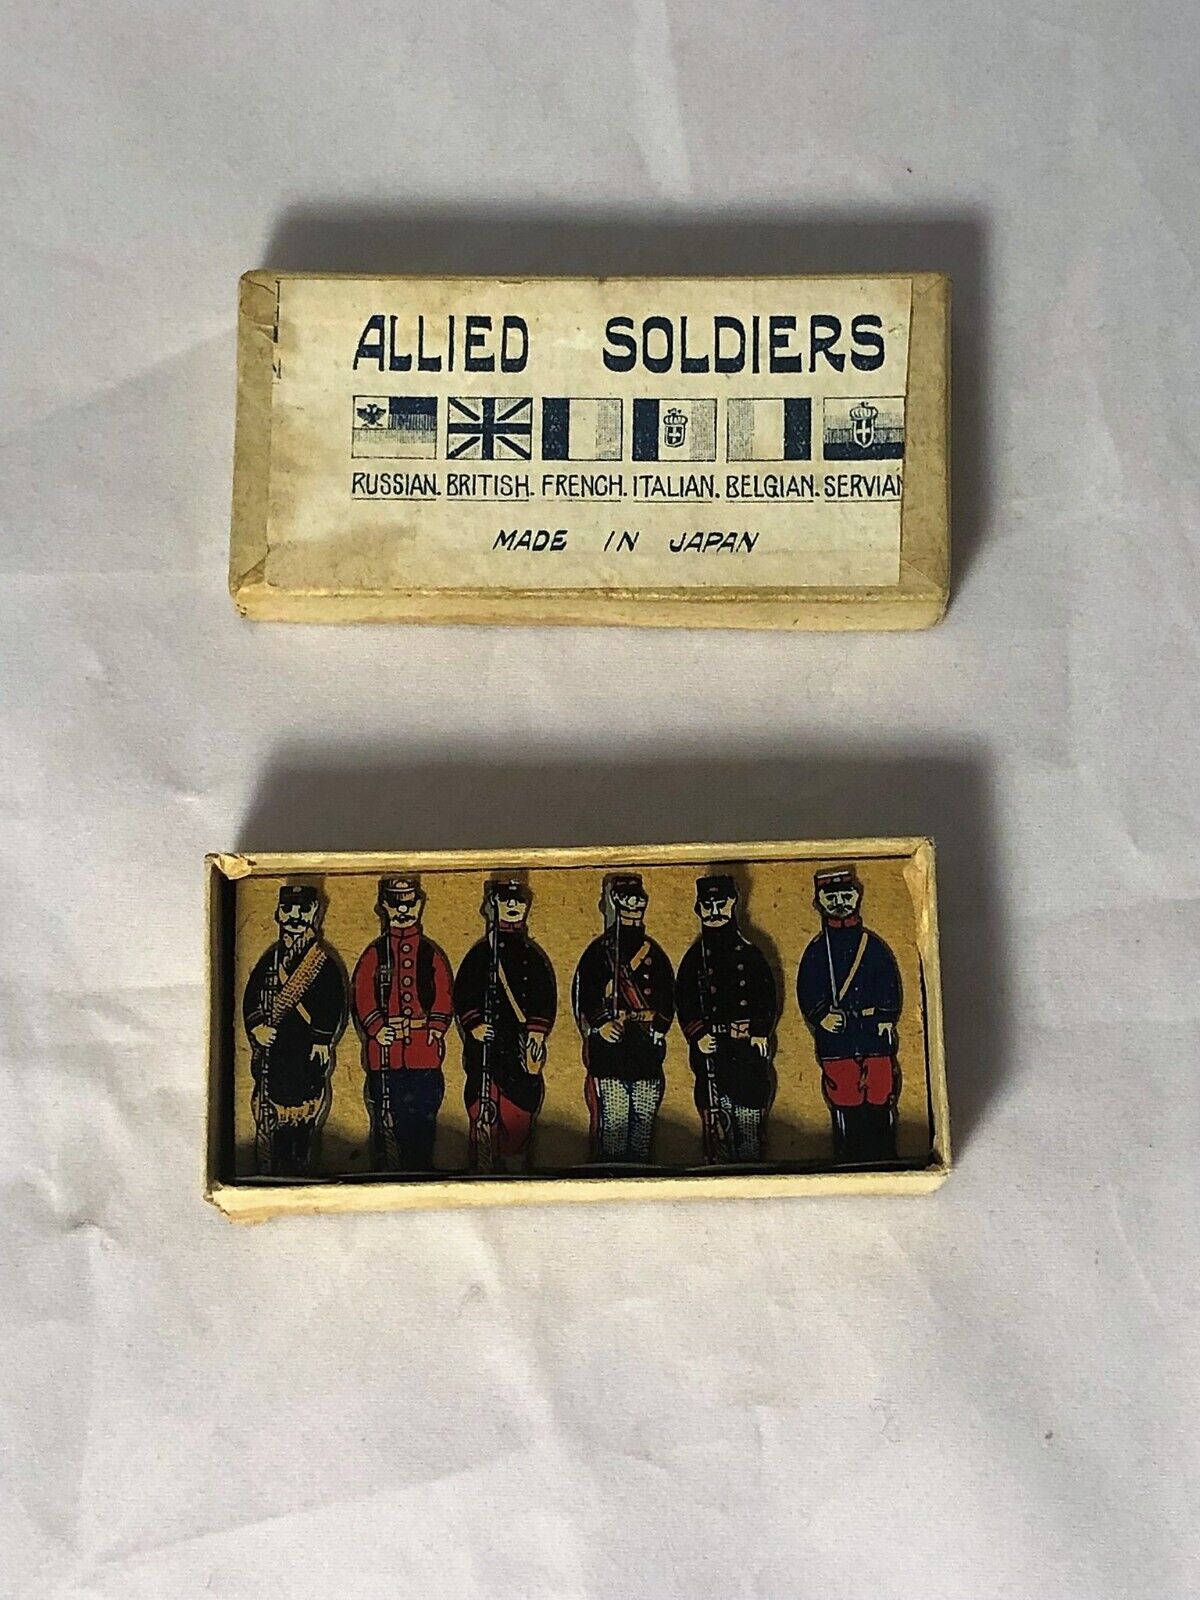 WWI Tin Soldiers in Their Box, Allied Soldiers - Very Rare -D1